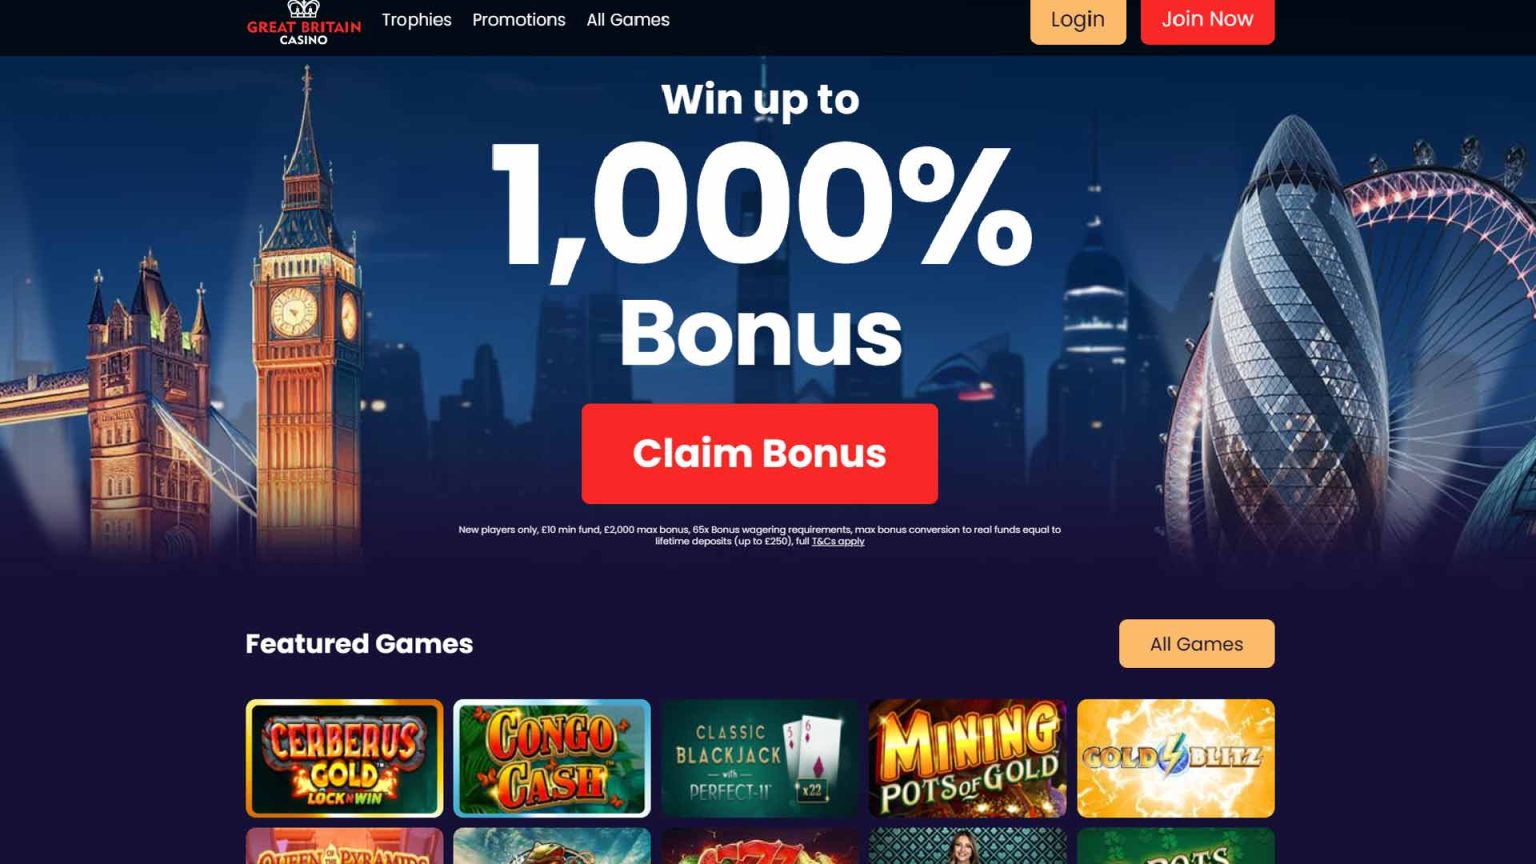 Great Britain Casino Review